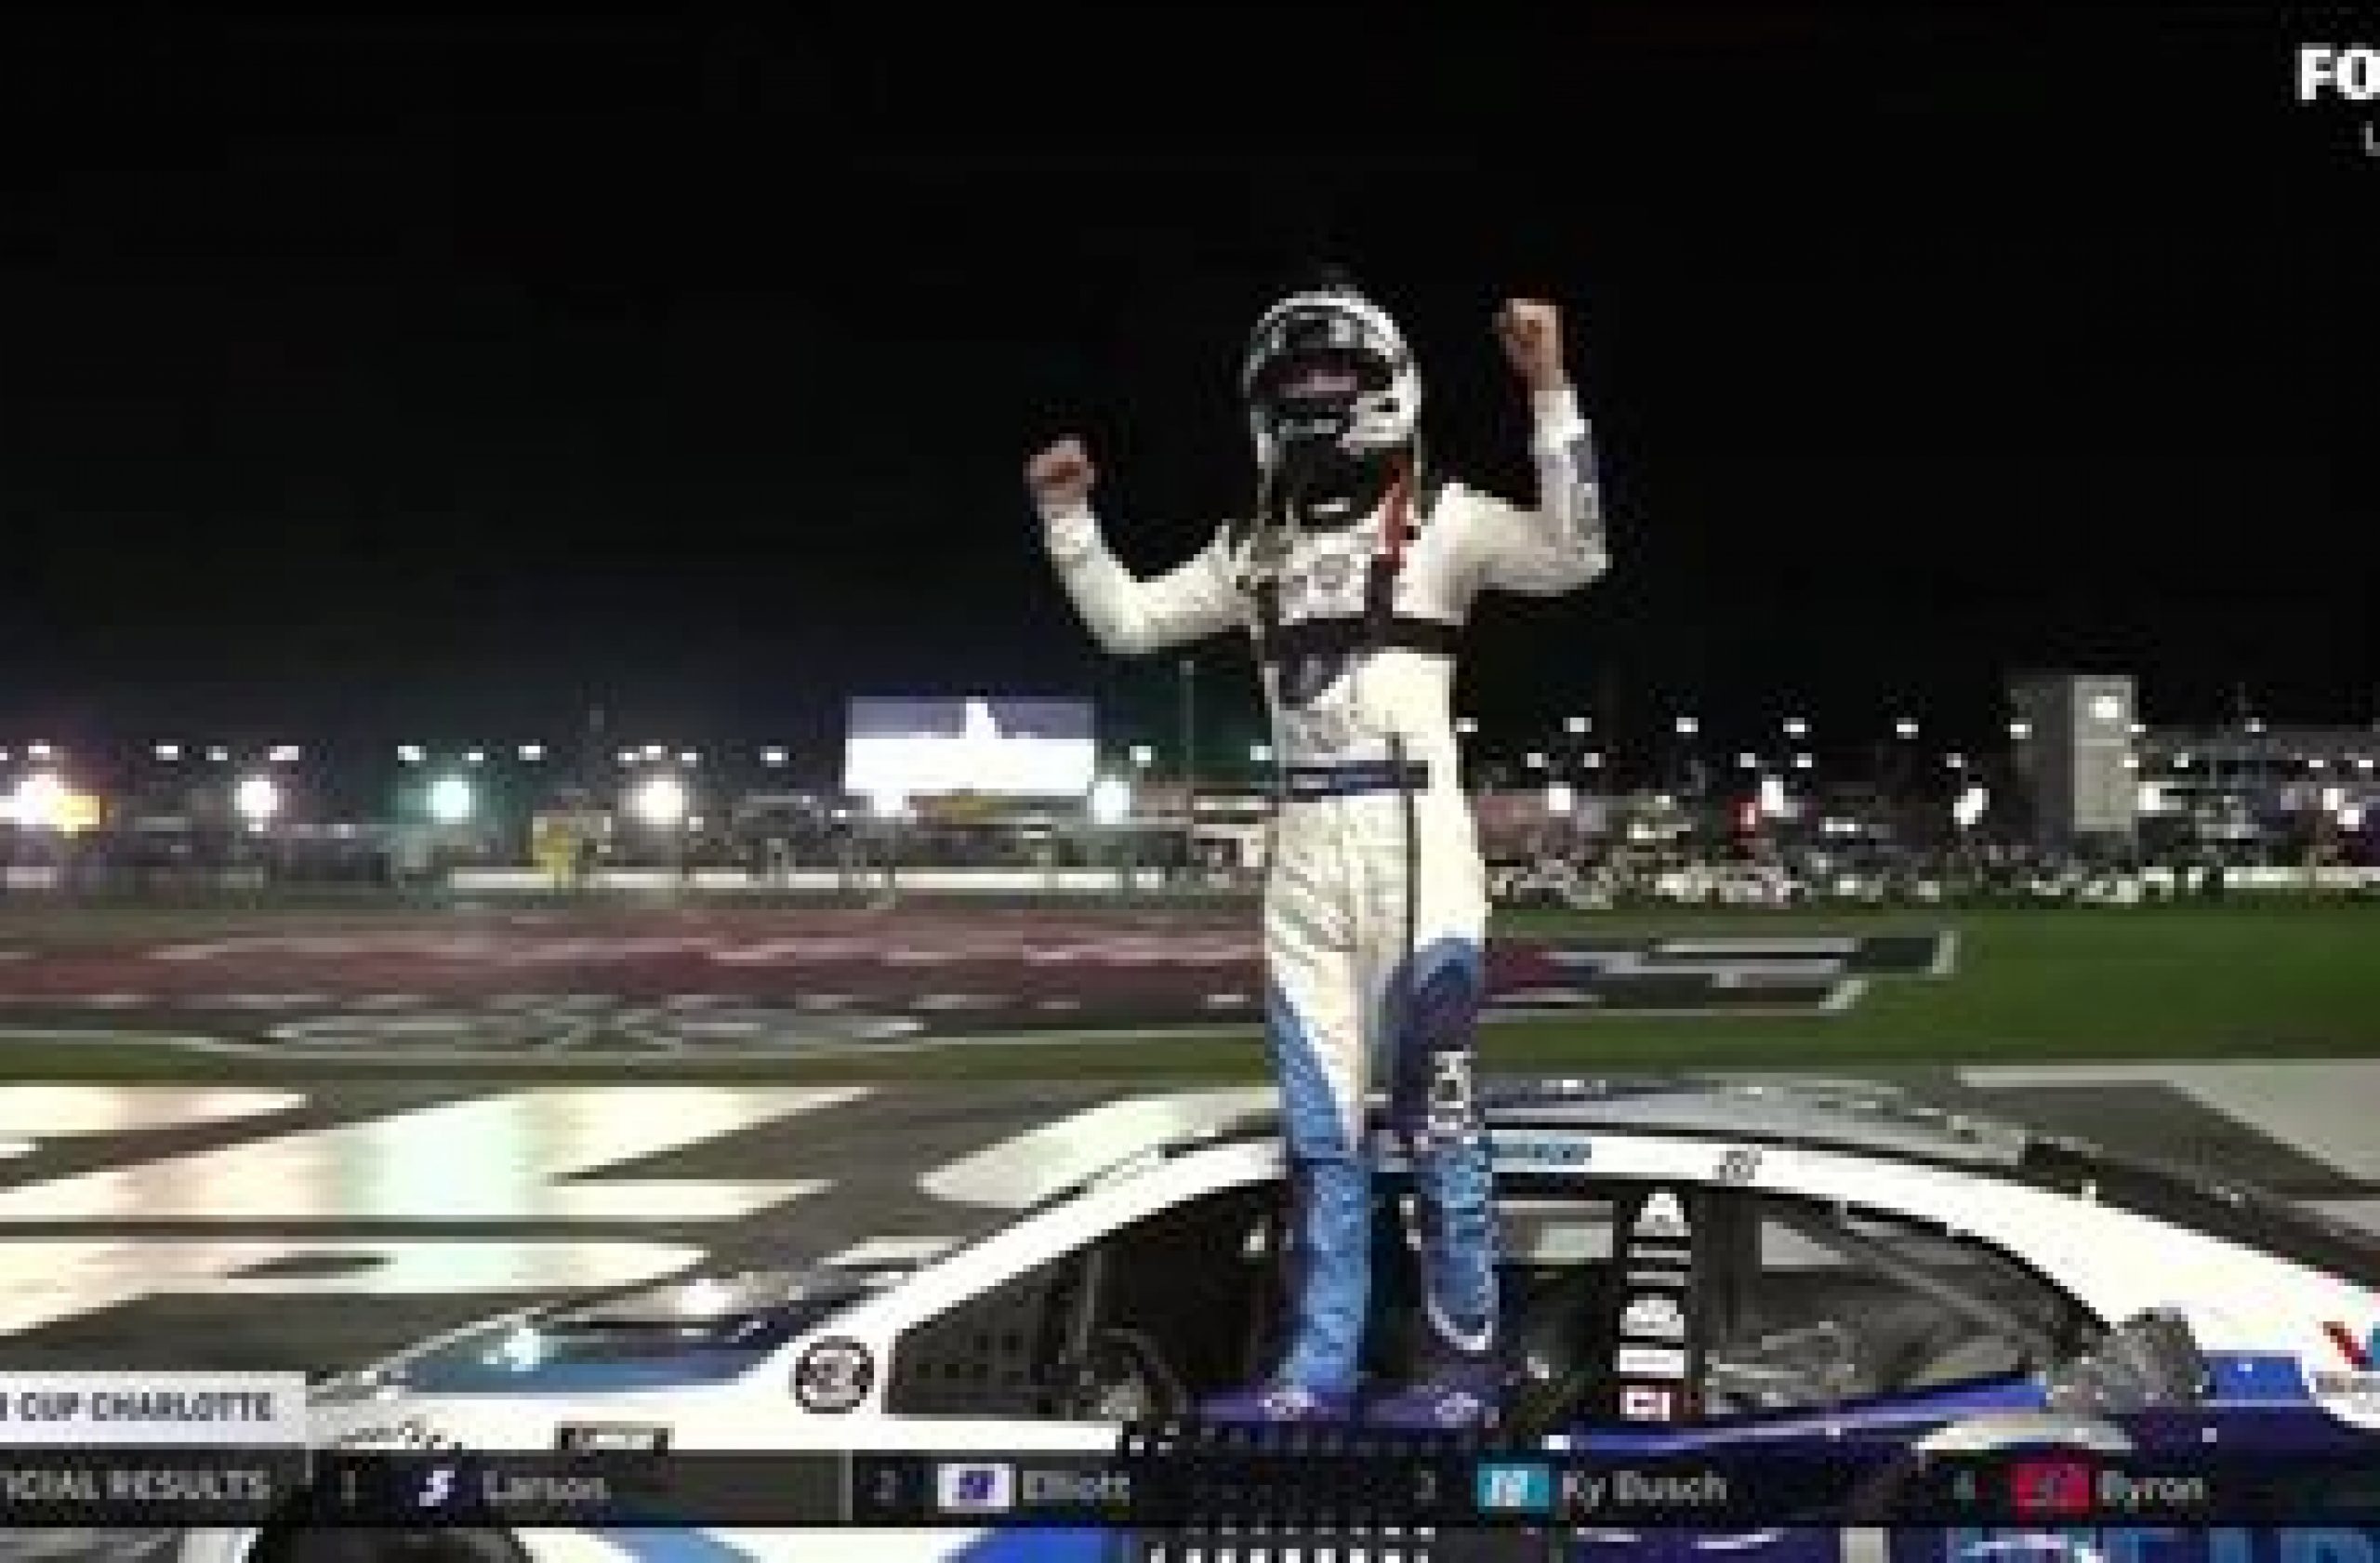 FINAL LAPS: Kyle Larson pulls away from Hendrick teammates for dominating Coke 600 win